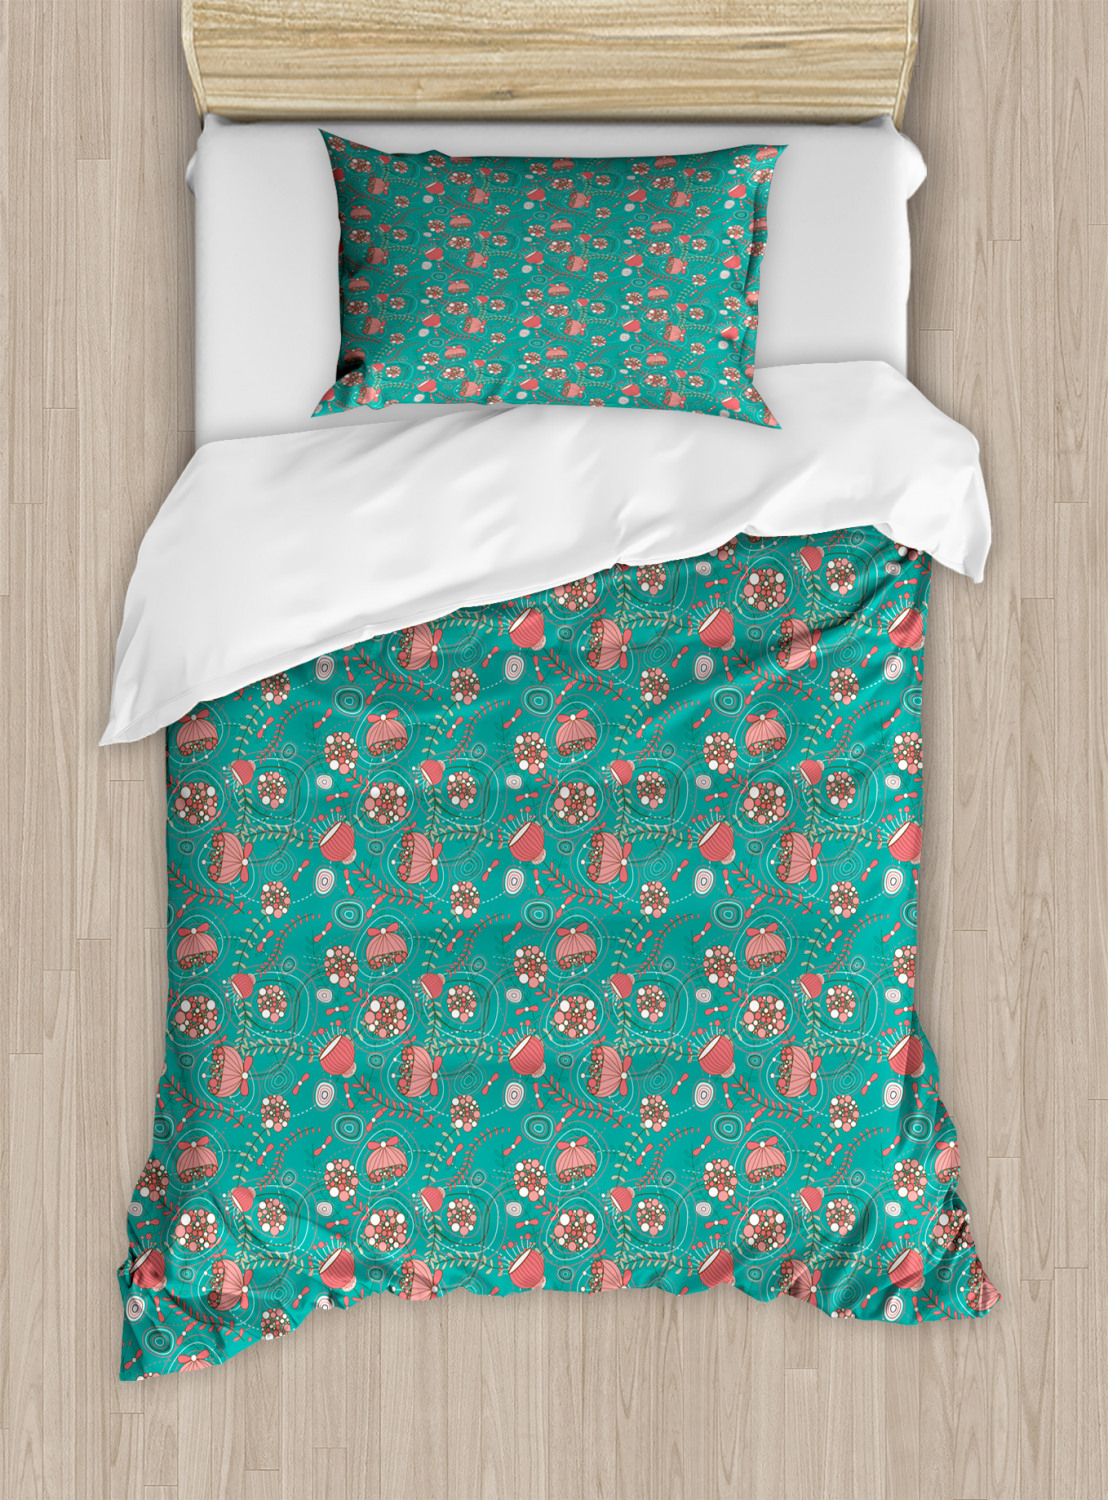 Turquoise Duvet Cover Set Twin Queen King Sizes With Pillow Shams